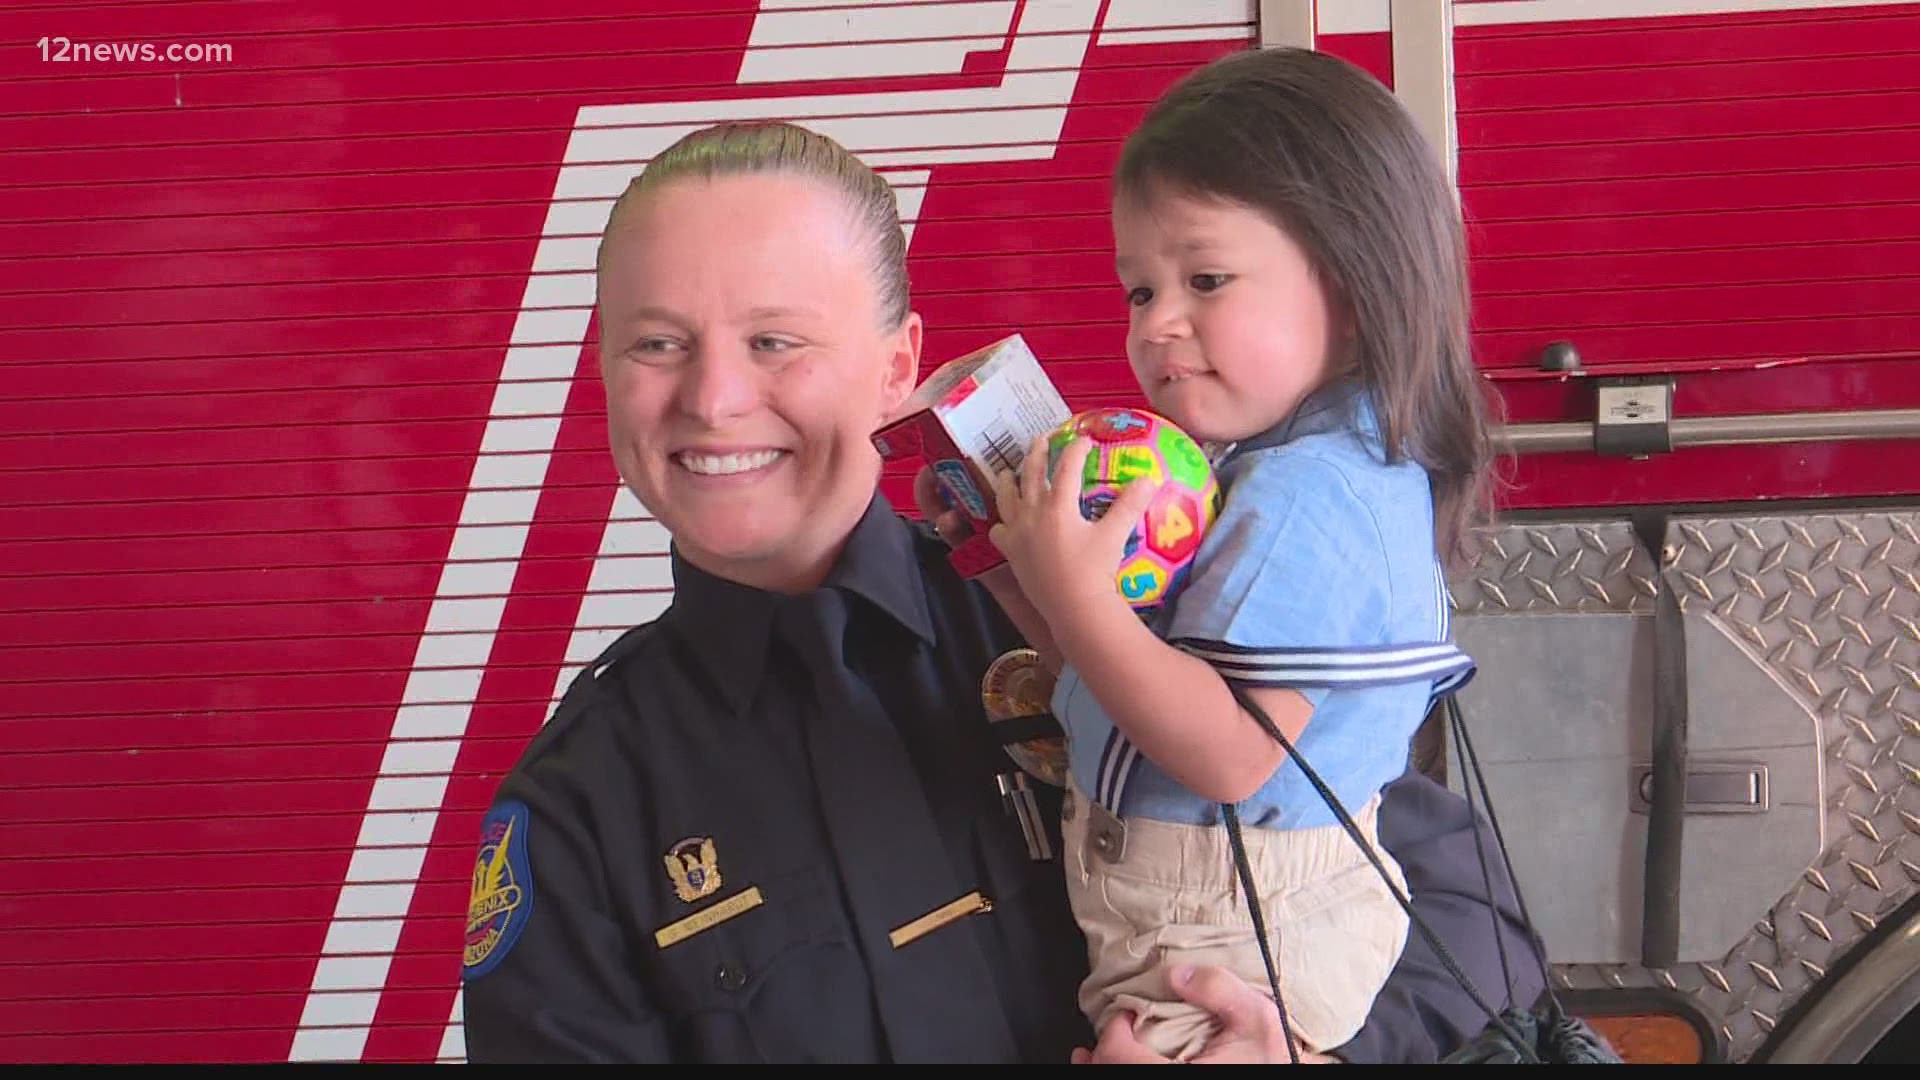 Two months ago a 2-year-old Phoenix boy slipped underwater in the pool at his house, nearly drowning. He and his family met the first responders who saved his life.